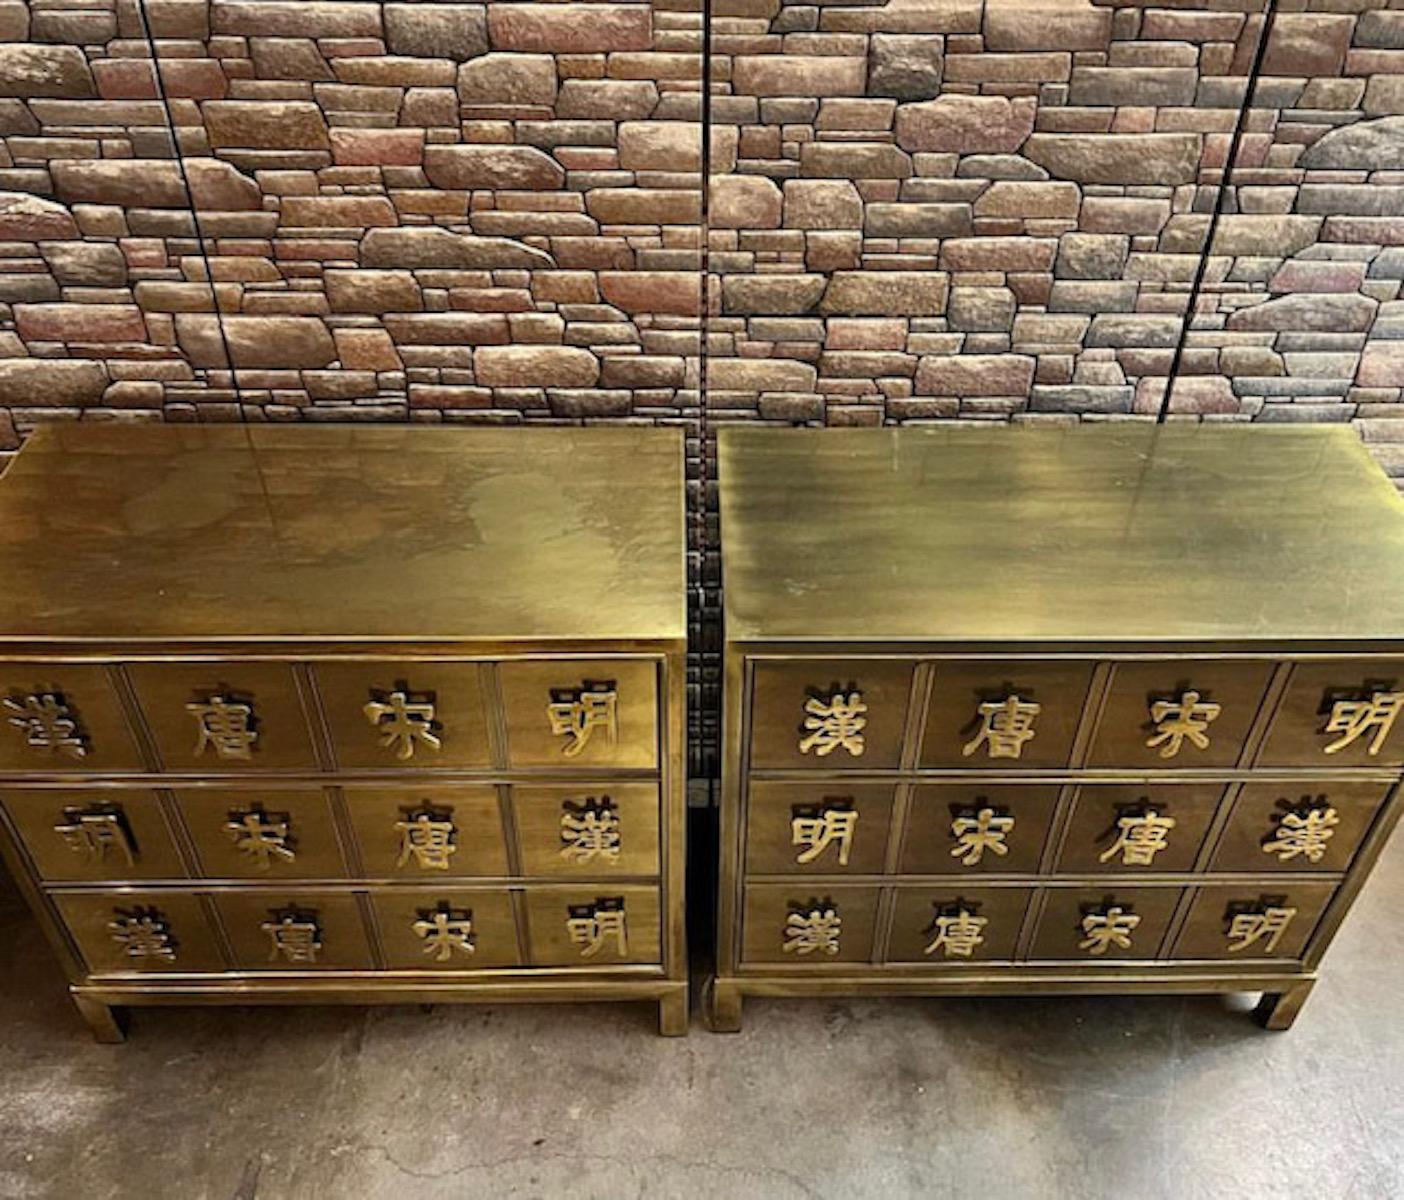 Pair of dynasty brass chest of drawers by Mastercraft. The chest includes pulls designed with Chinese characters which represent the four dynasties. Each dresser features three drawers and is in good overall vintage condition. There is some wear on